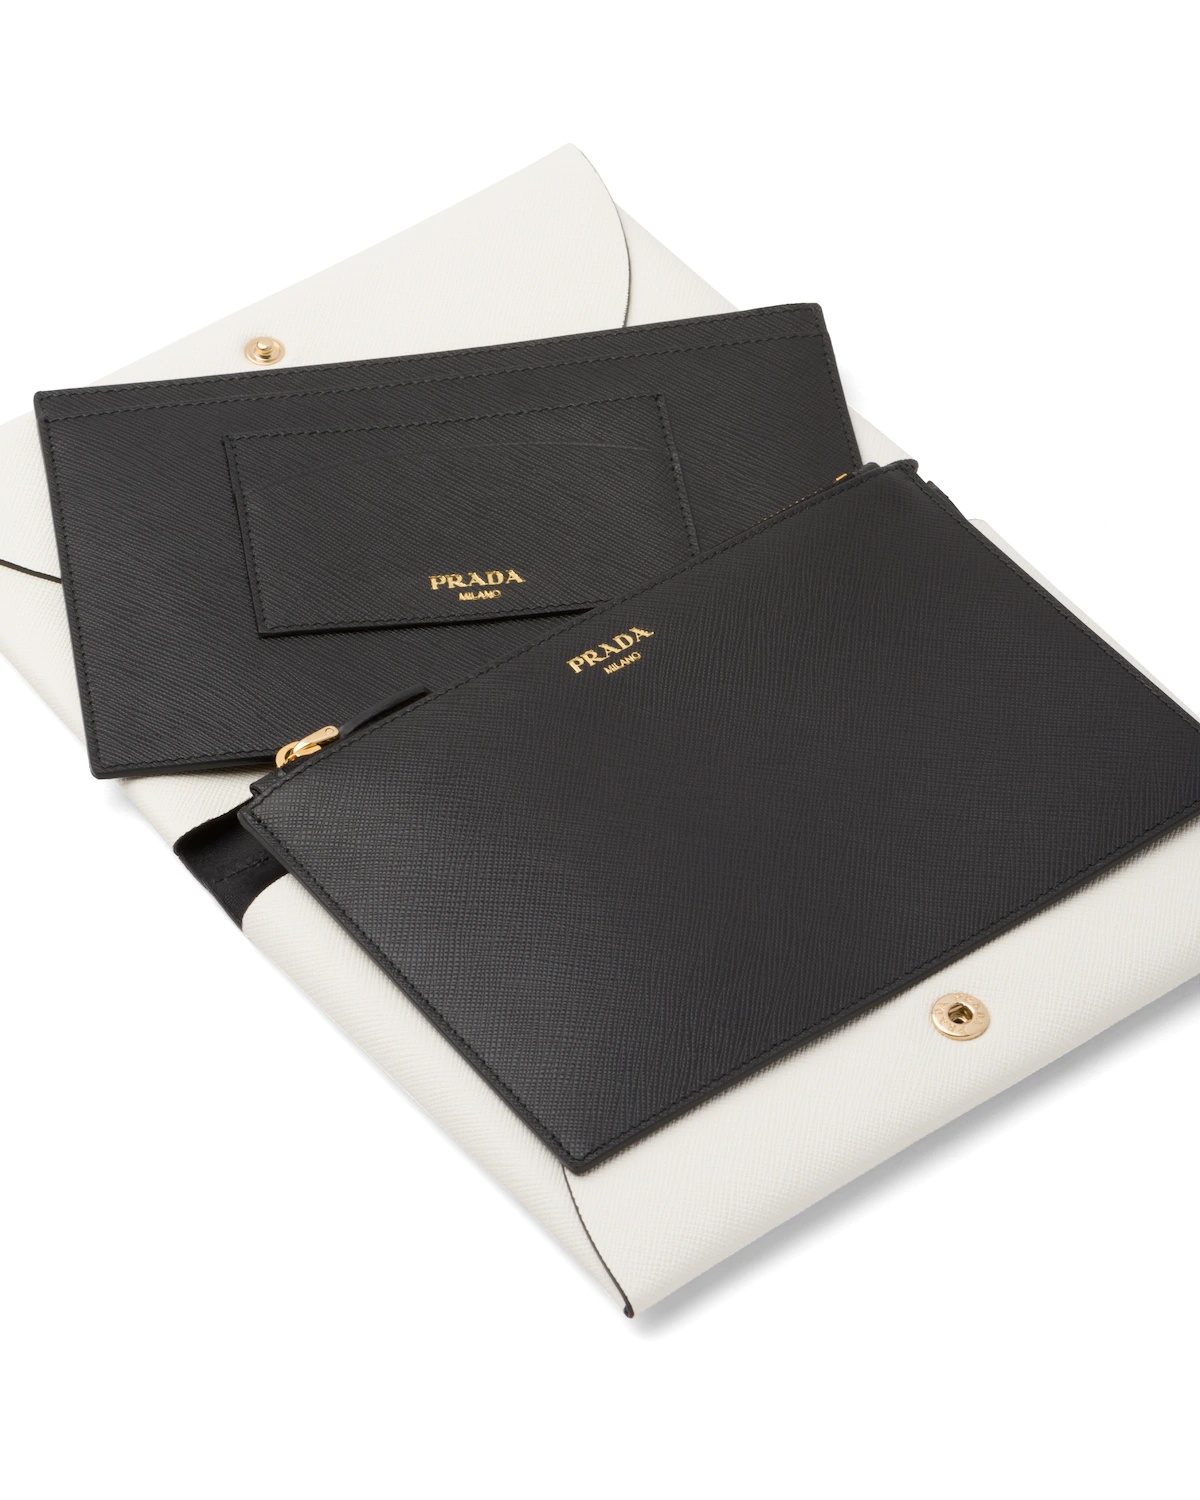 Small Saffiano leather document holder - 6